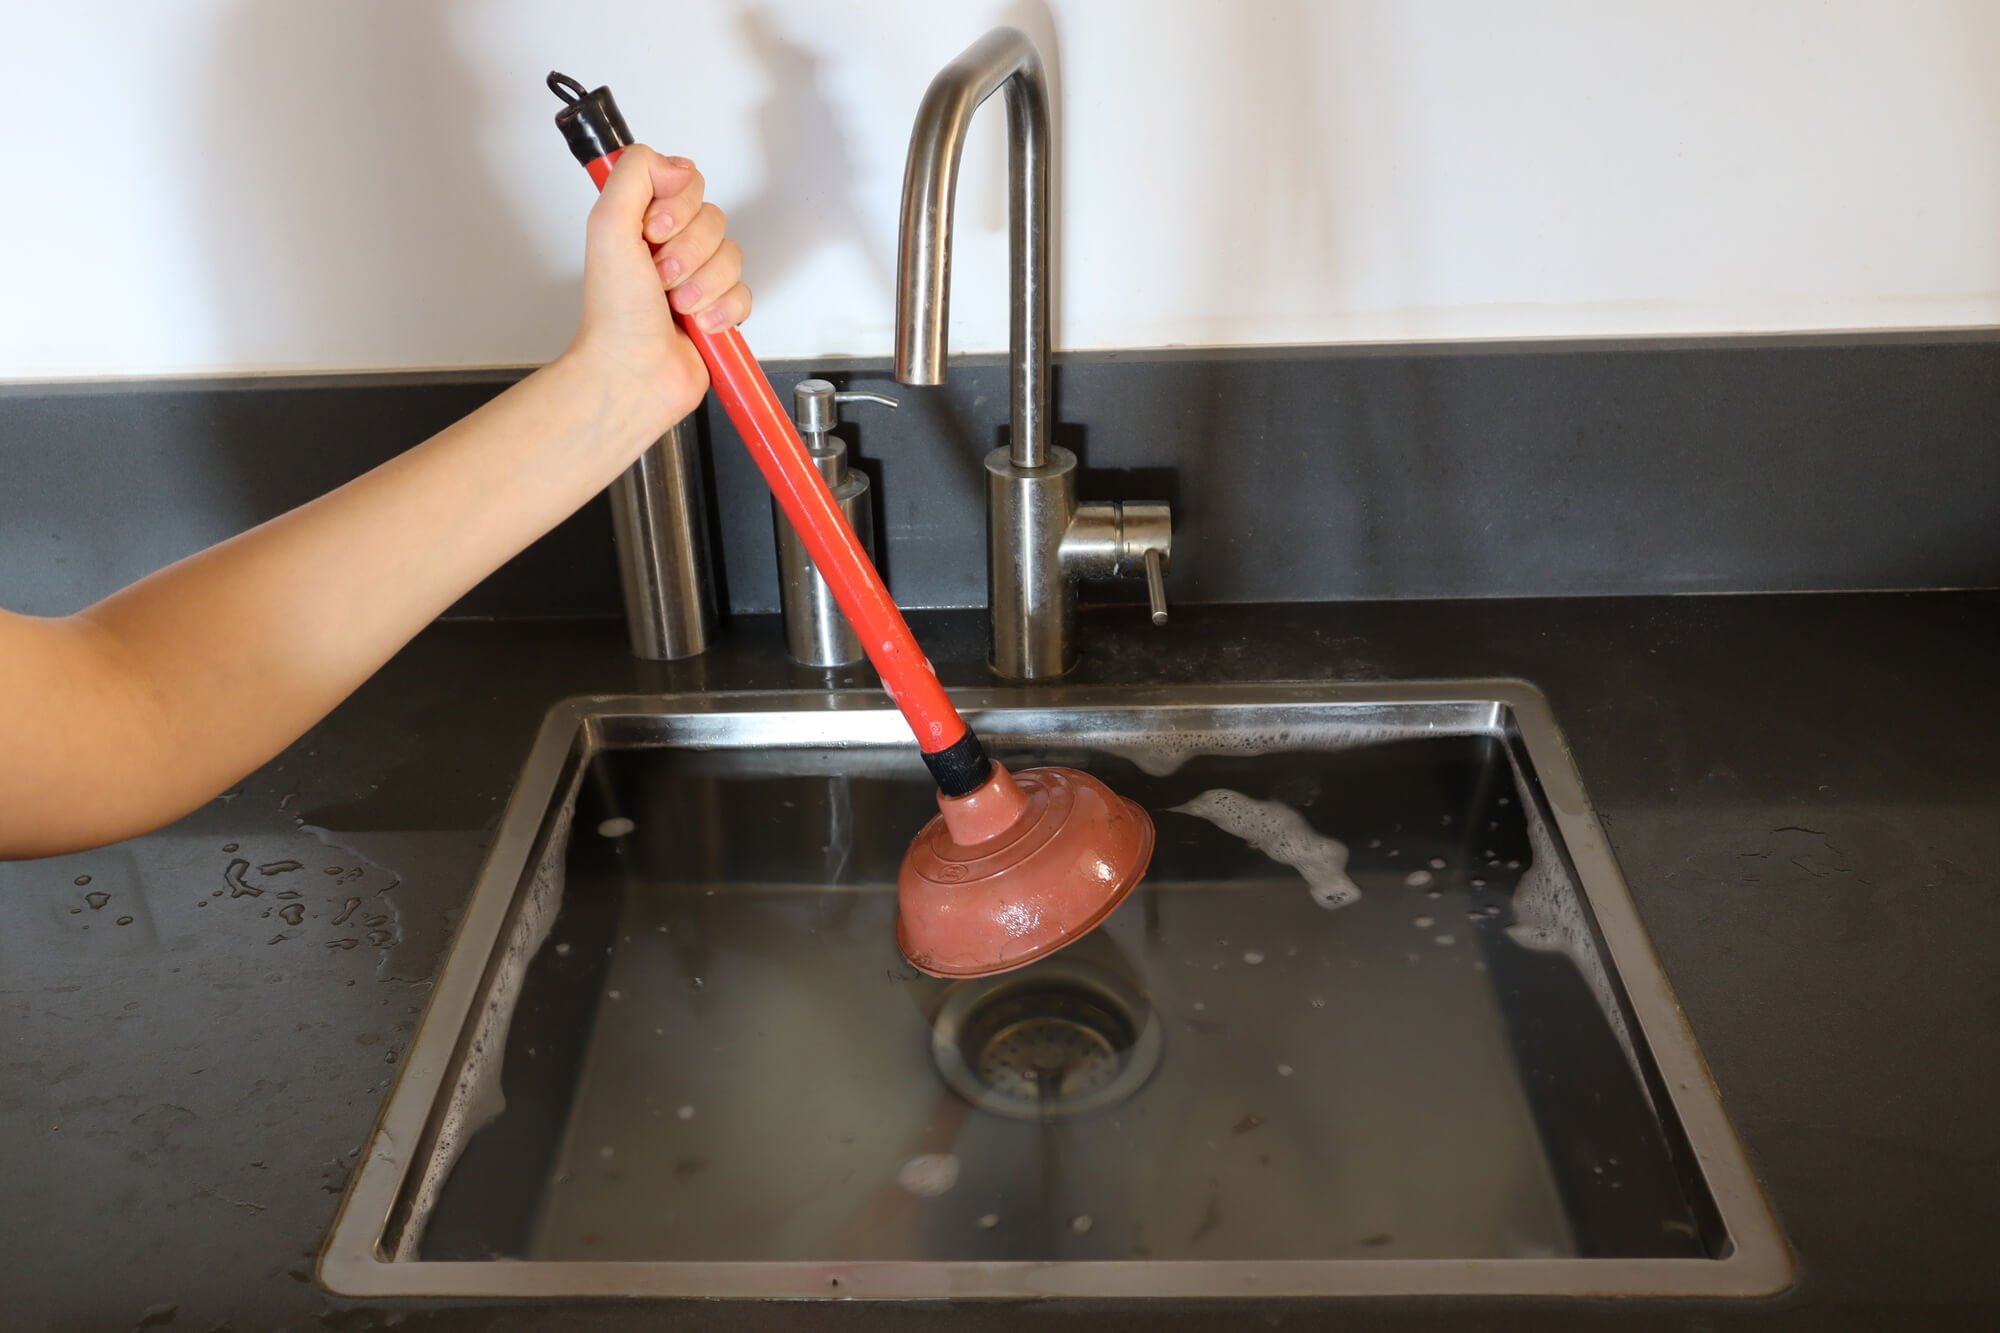 Some easy tips to fix blocked drains